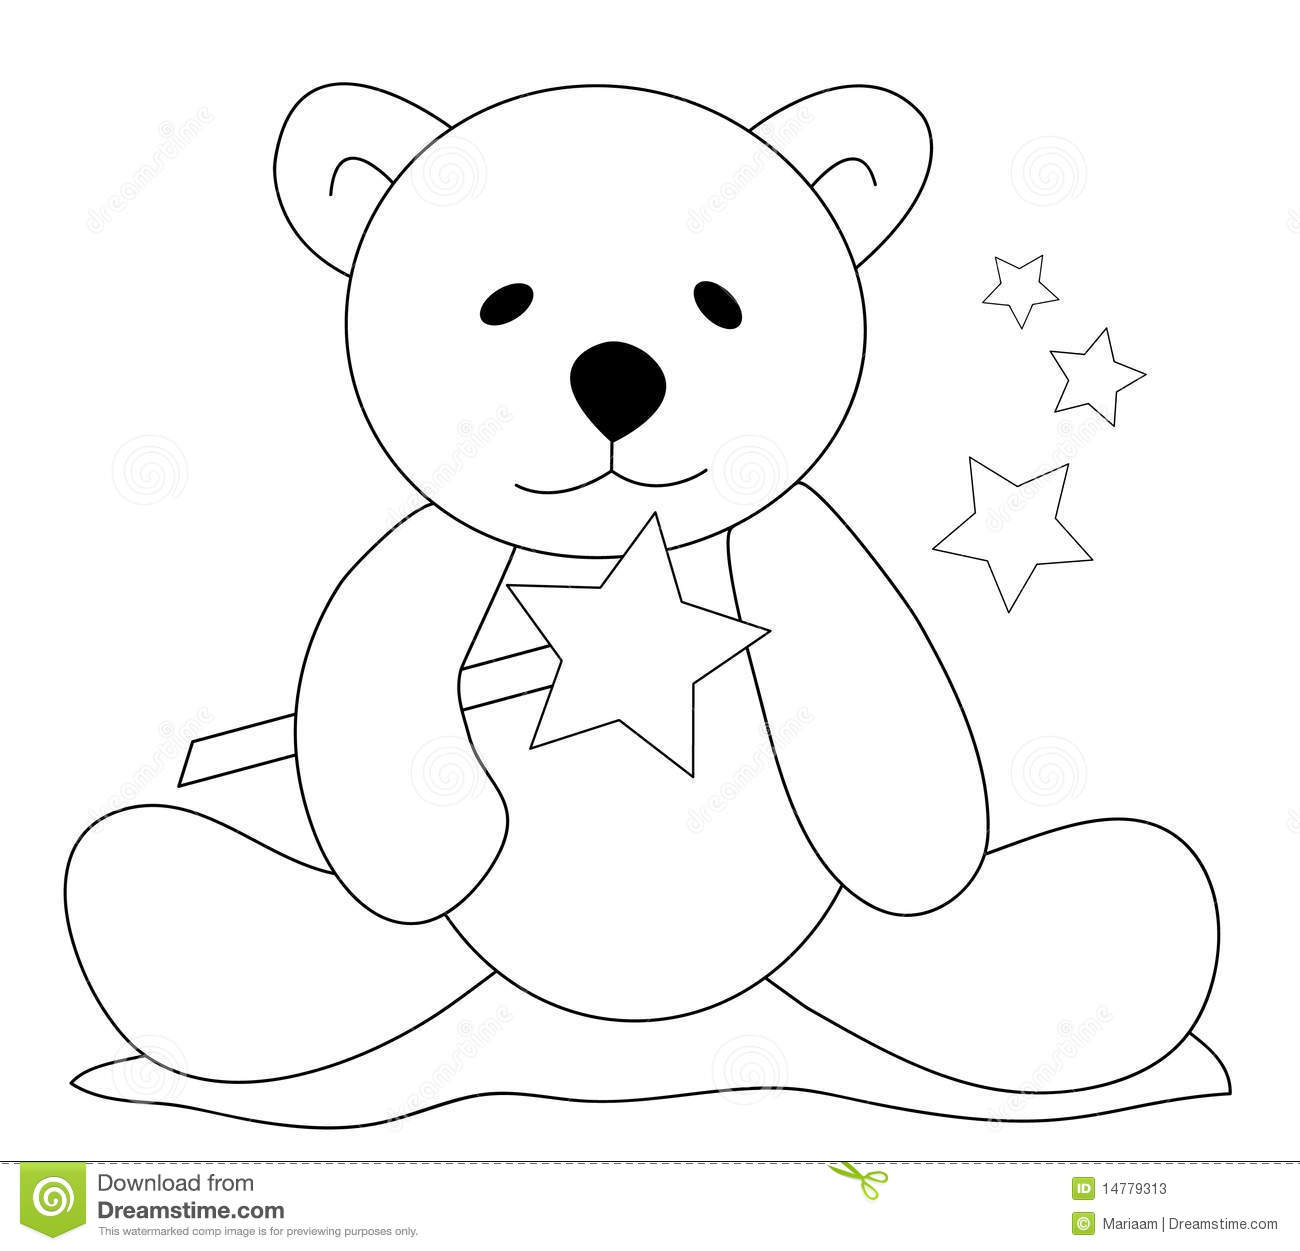     Sketch Of A Teddy Bear Sitting On The Ground And Holding A Magic Wand